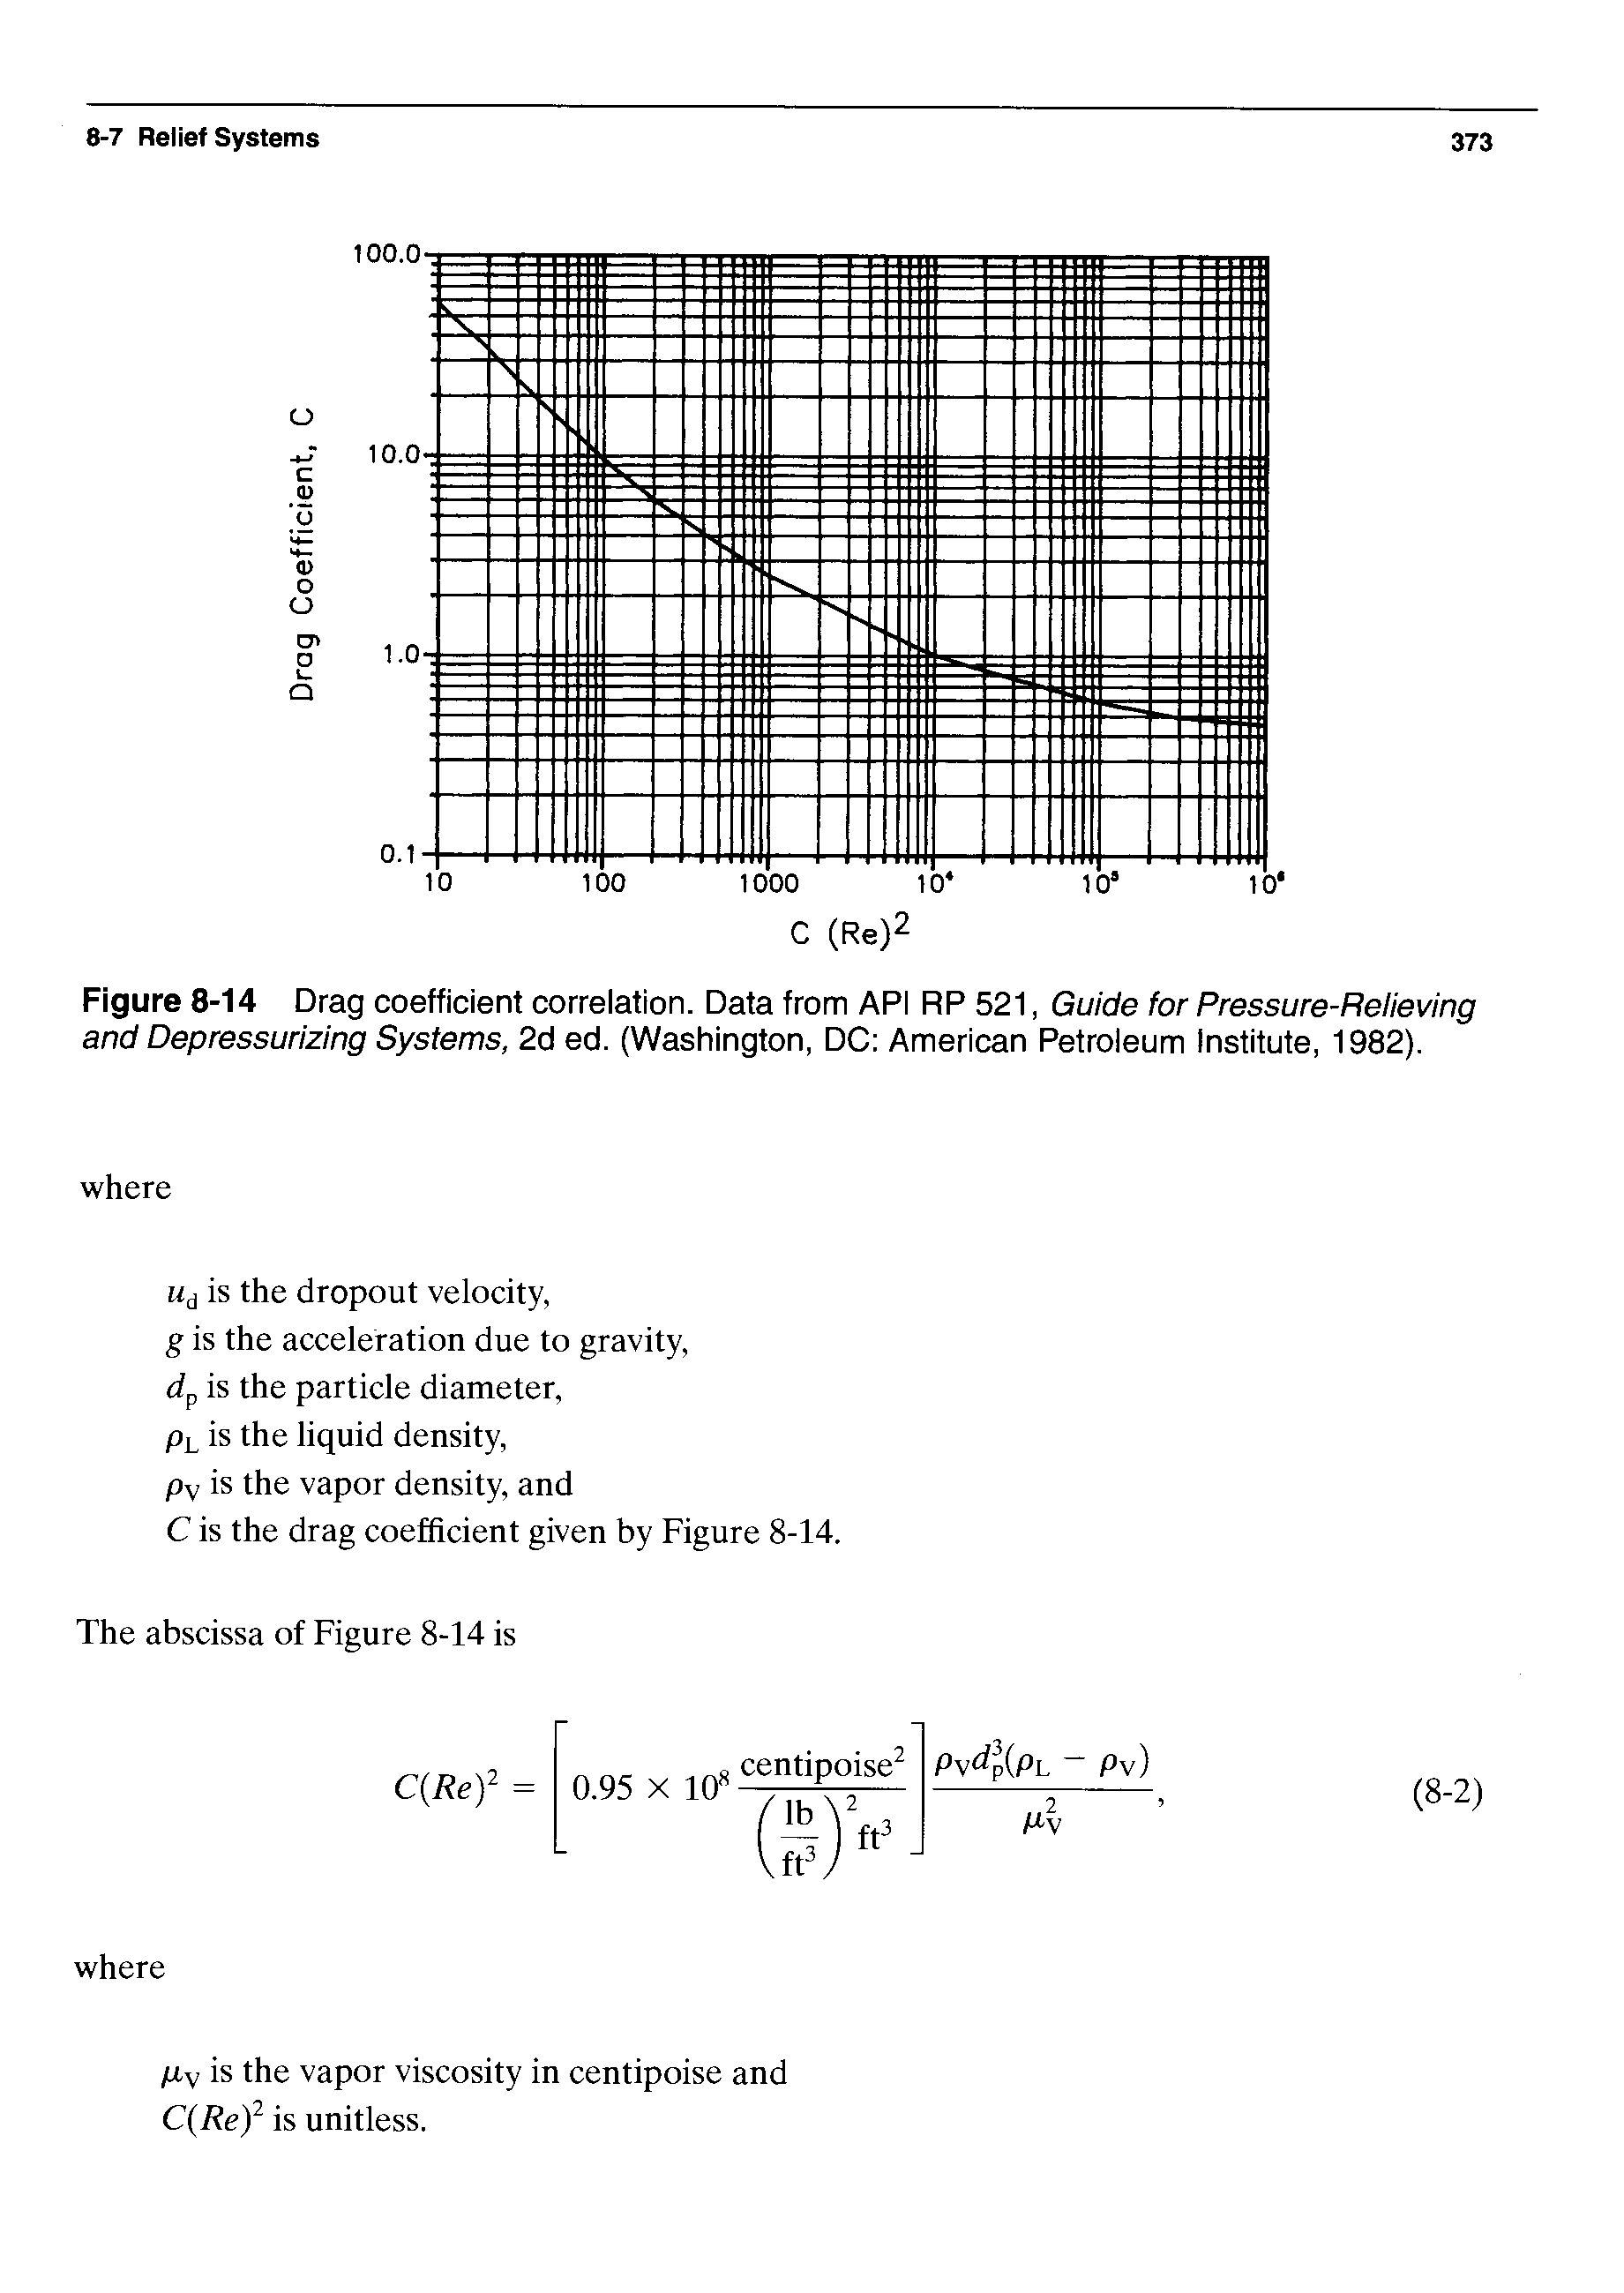 Figure 8-14 Drag coefficient correlation. Data from API RP 521, Guide for Pressure-Relieving and Depressurizing Systems, 2d ed. (Washington, DC American Petroleum Institute, 1982).